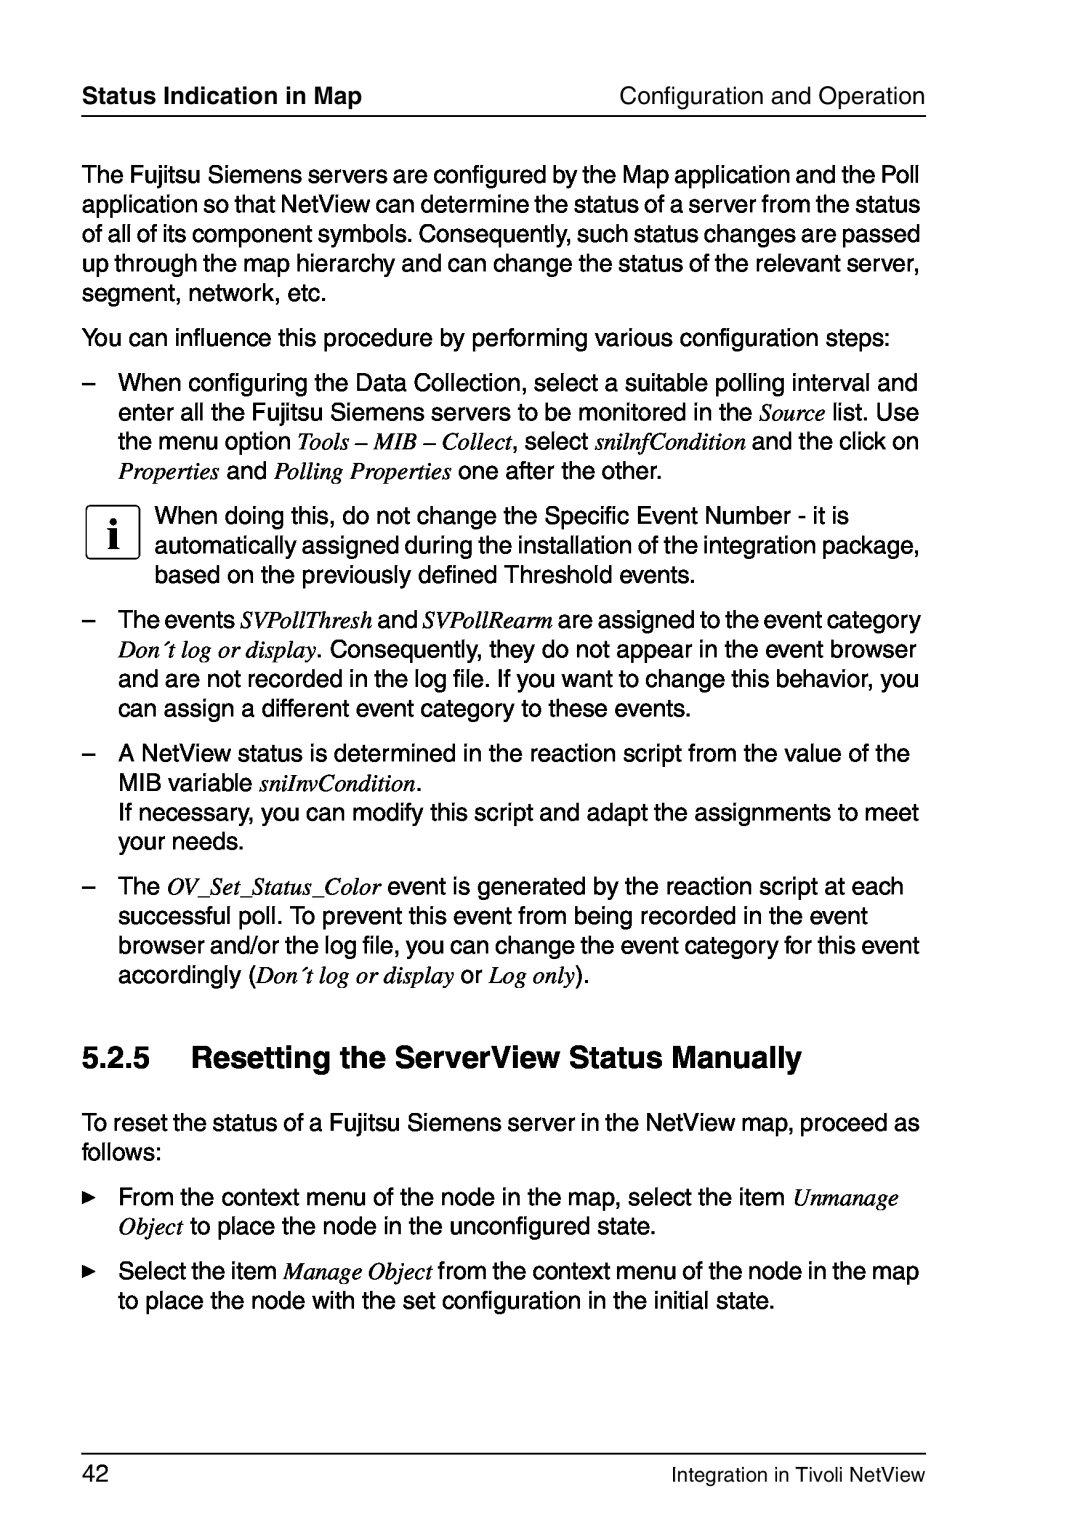 3D Connexion TivoII manual 5.2.5Resetting the ServerView Status Manually, Status Indication in Map 